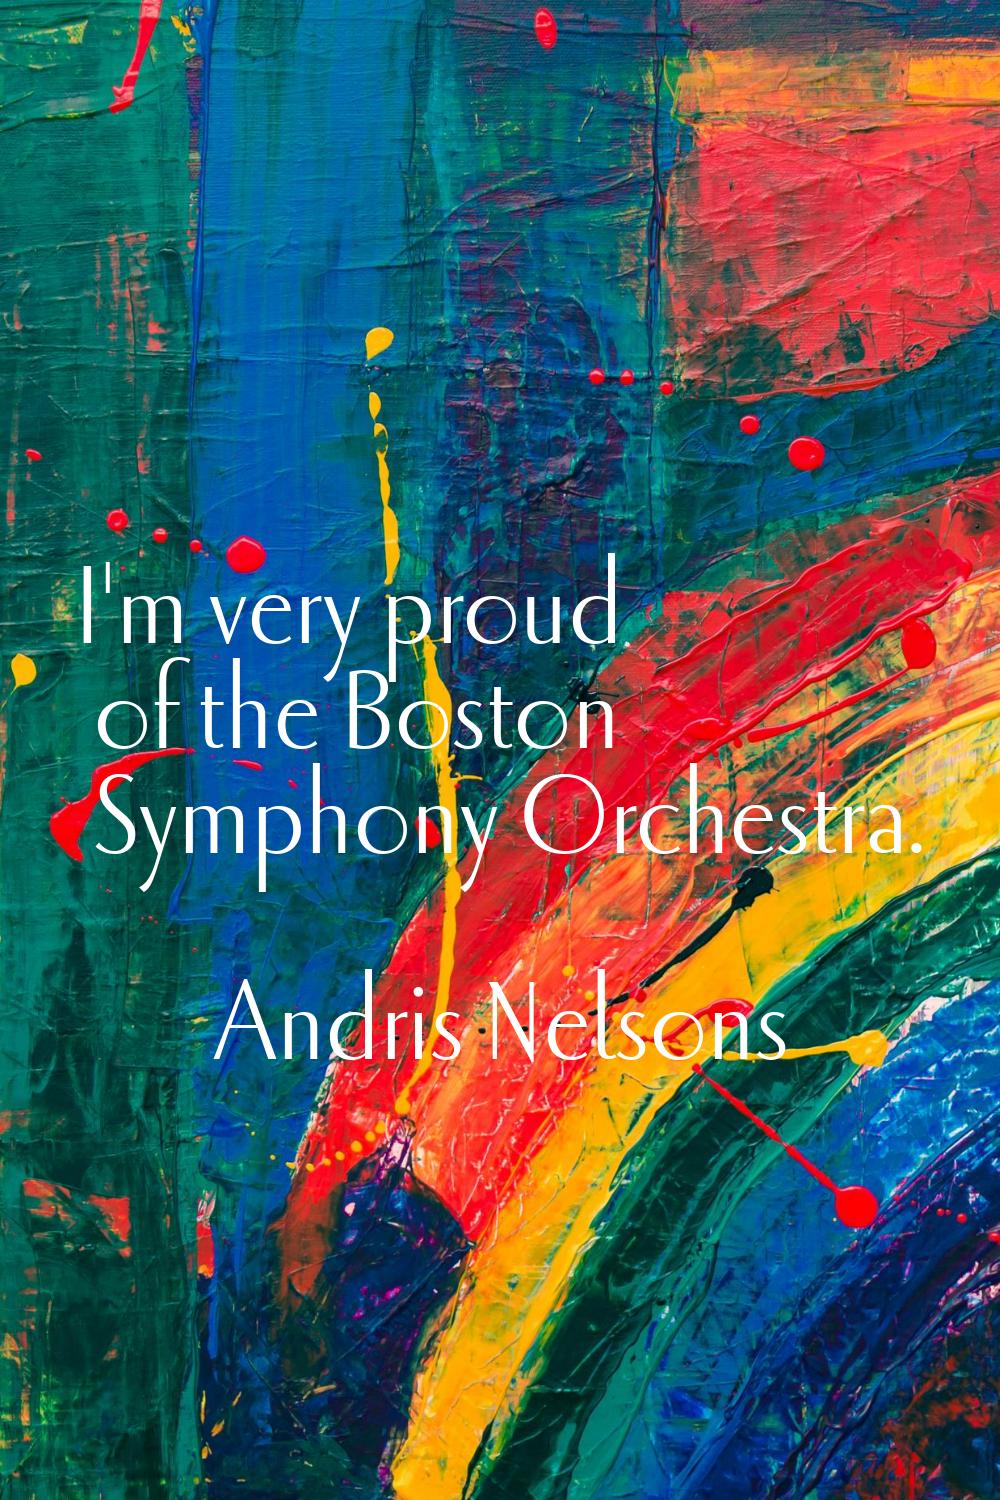 I'm very proud of the Boston Symphony Orchestra.